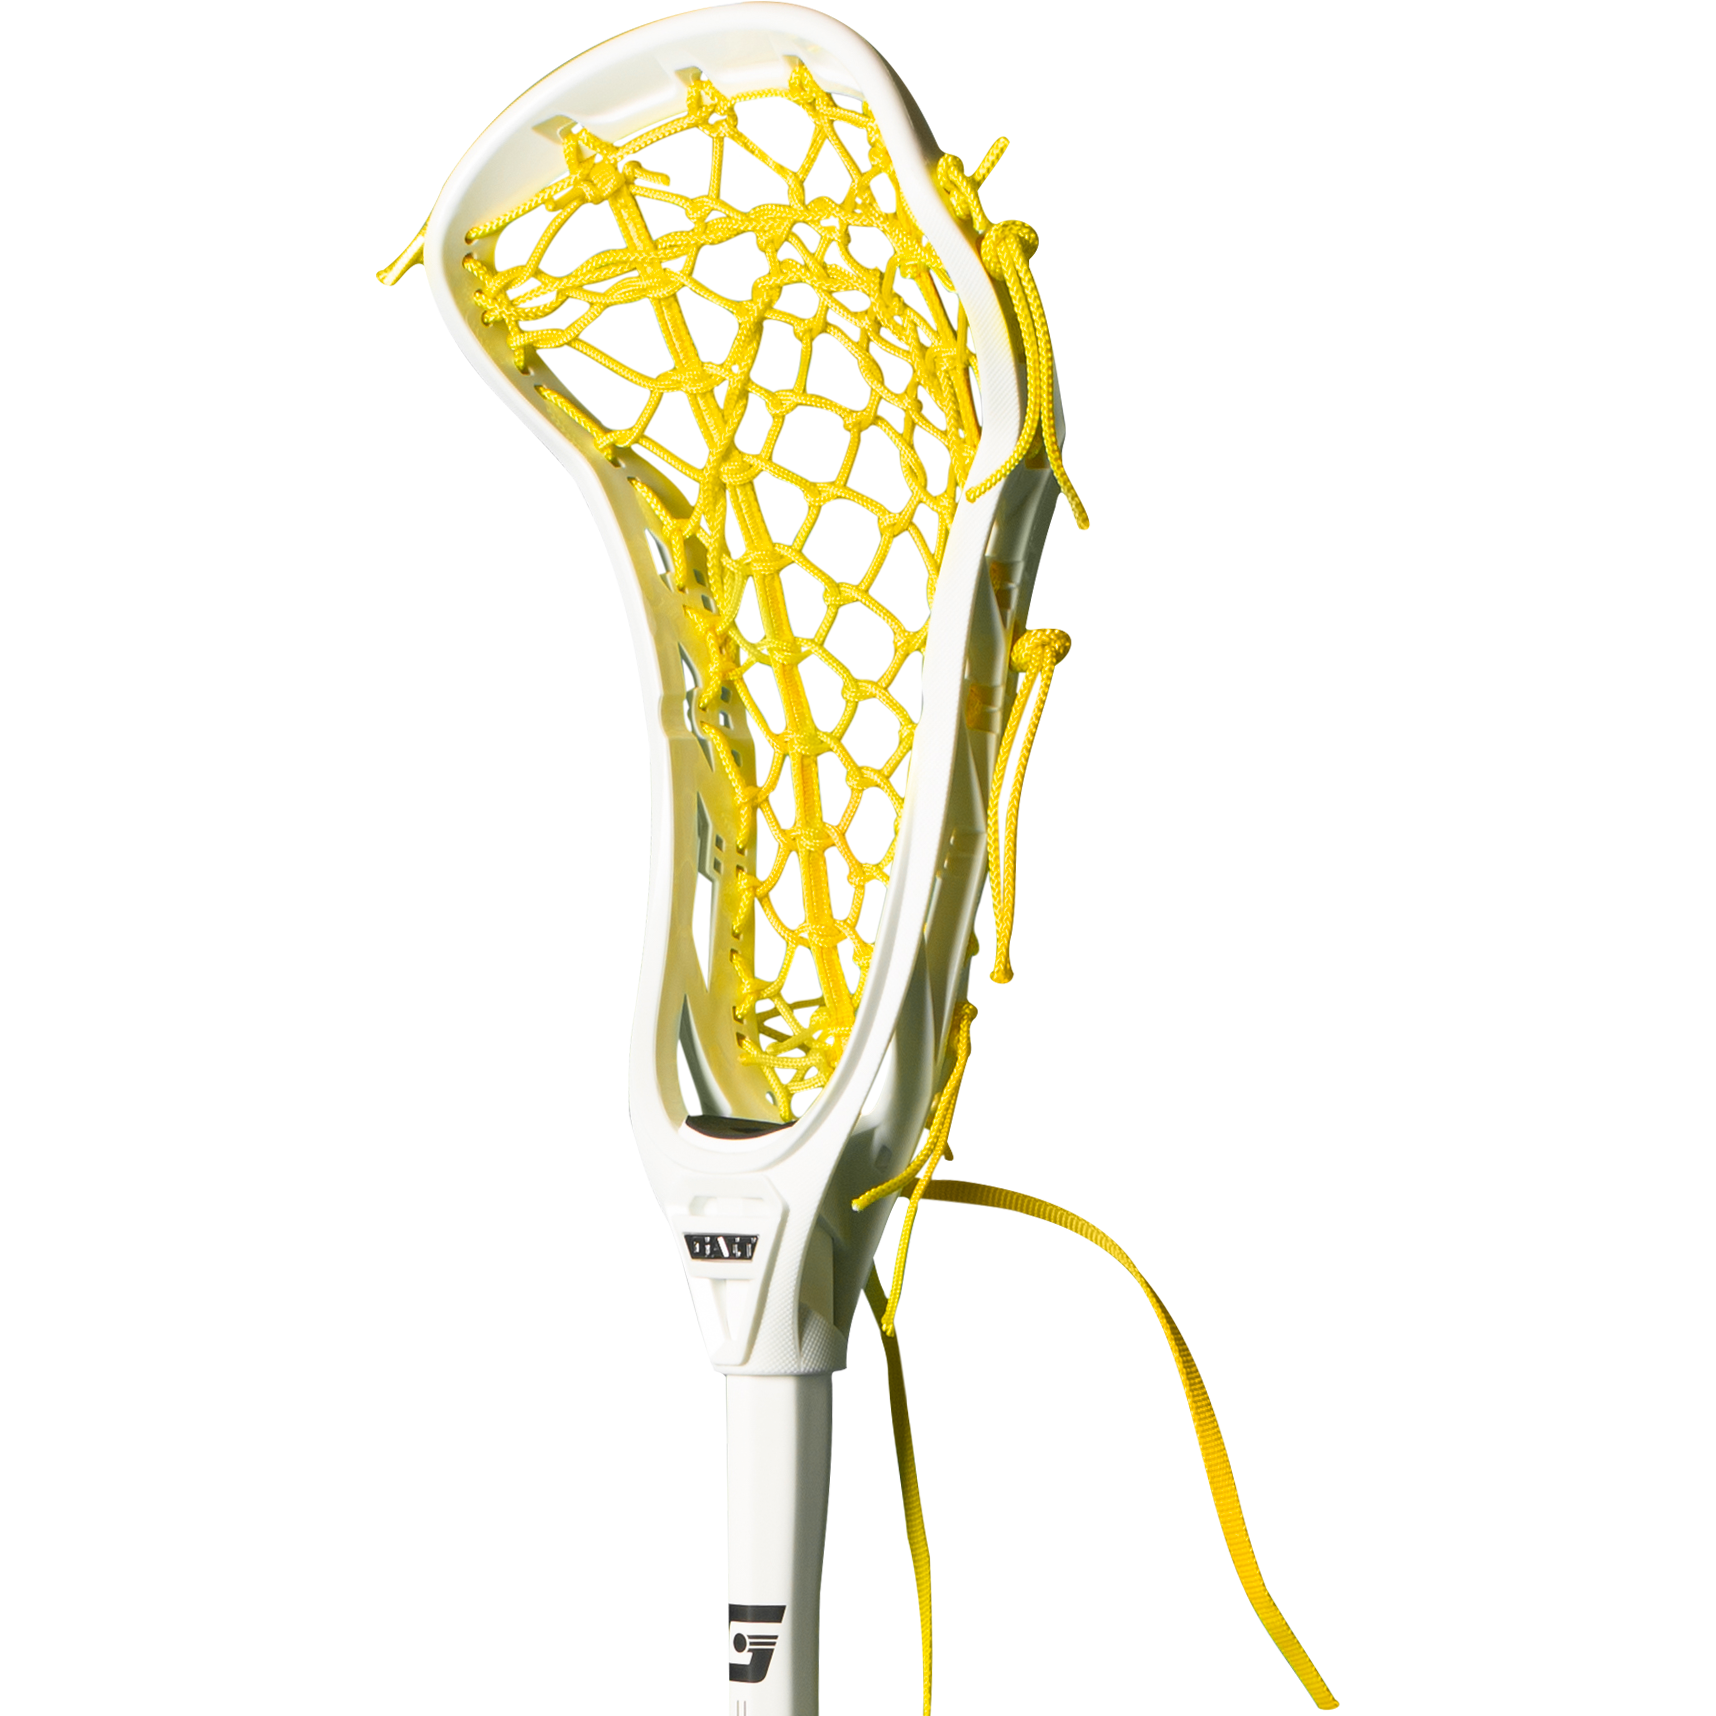 Gait Air 2 Women's Lacrosse Head with Flex Mesh White/Yellow angled view